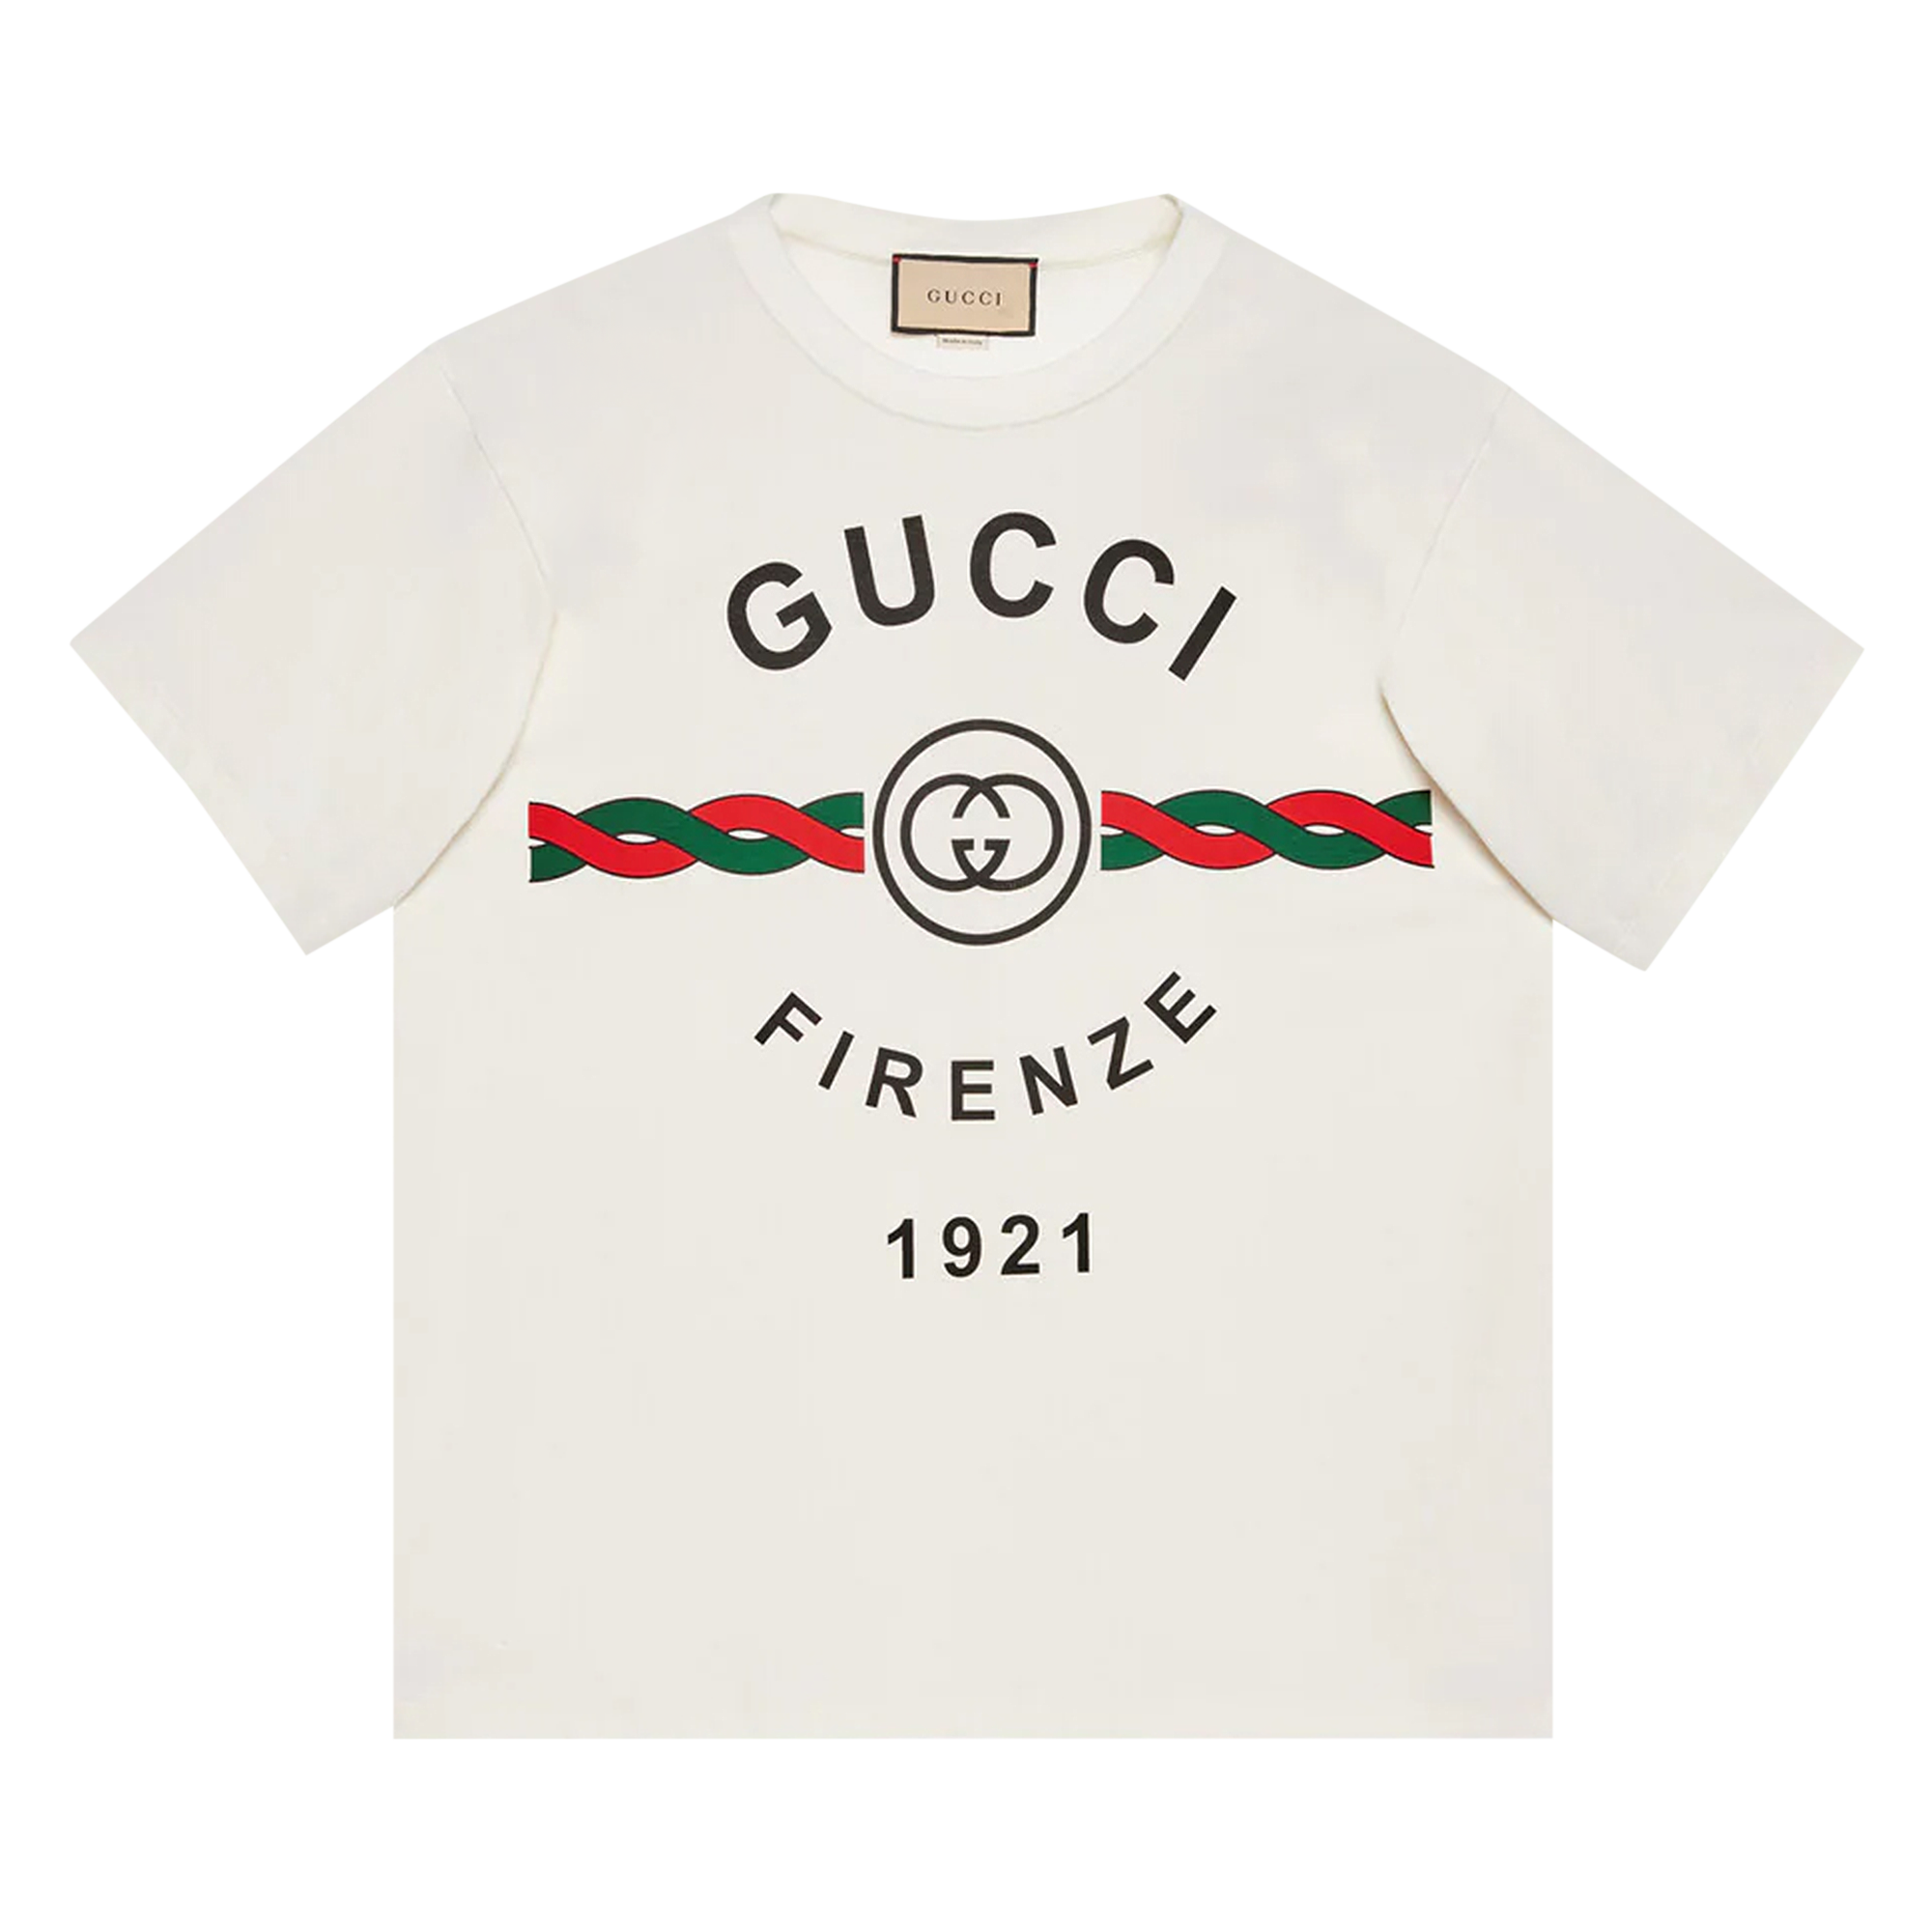 Pre-owned Gucci Firenze 1921 T-shirt 'white'